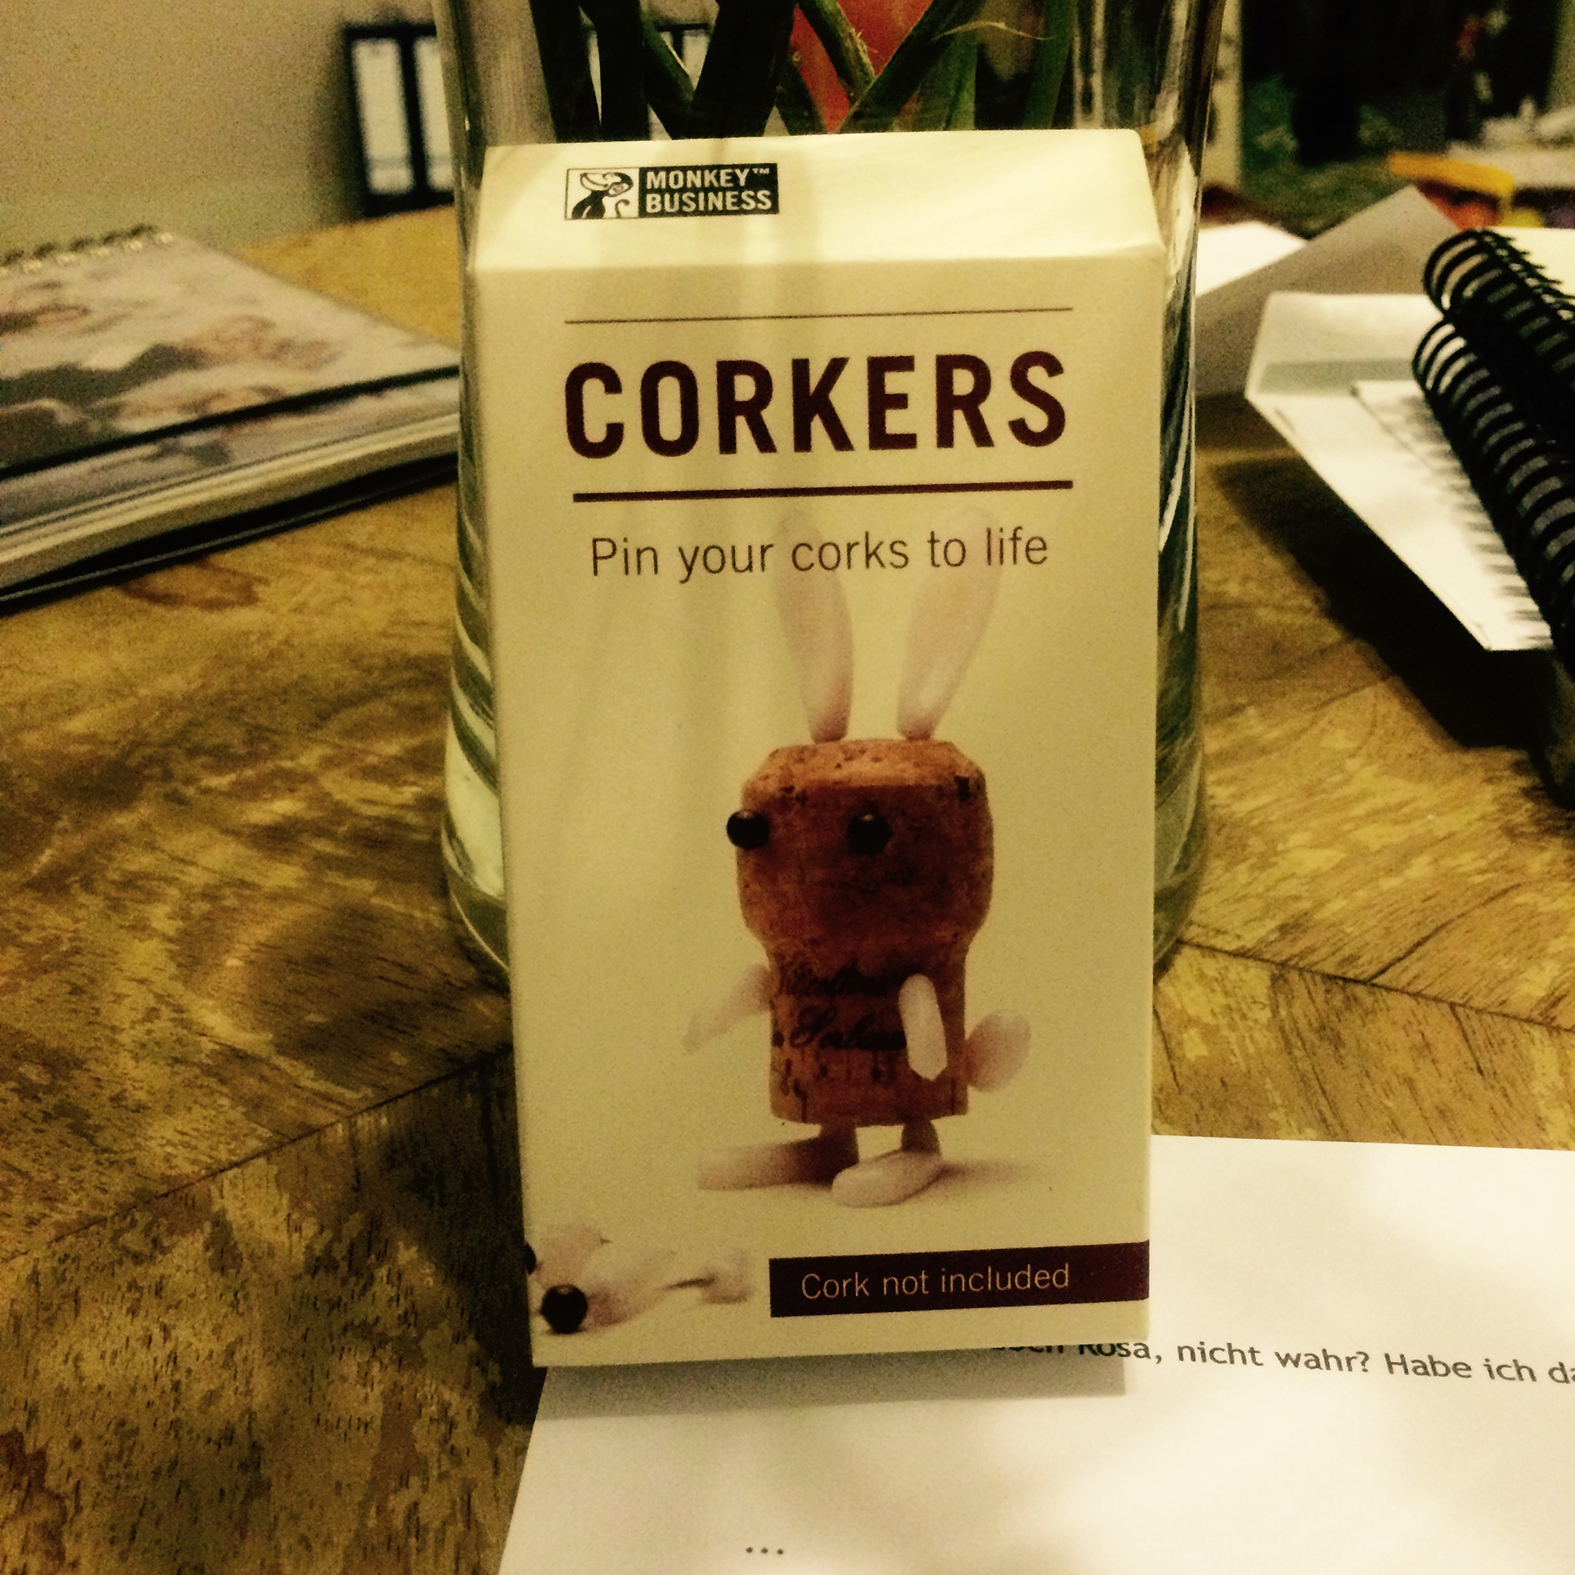 corkers